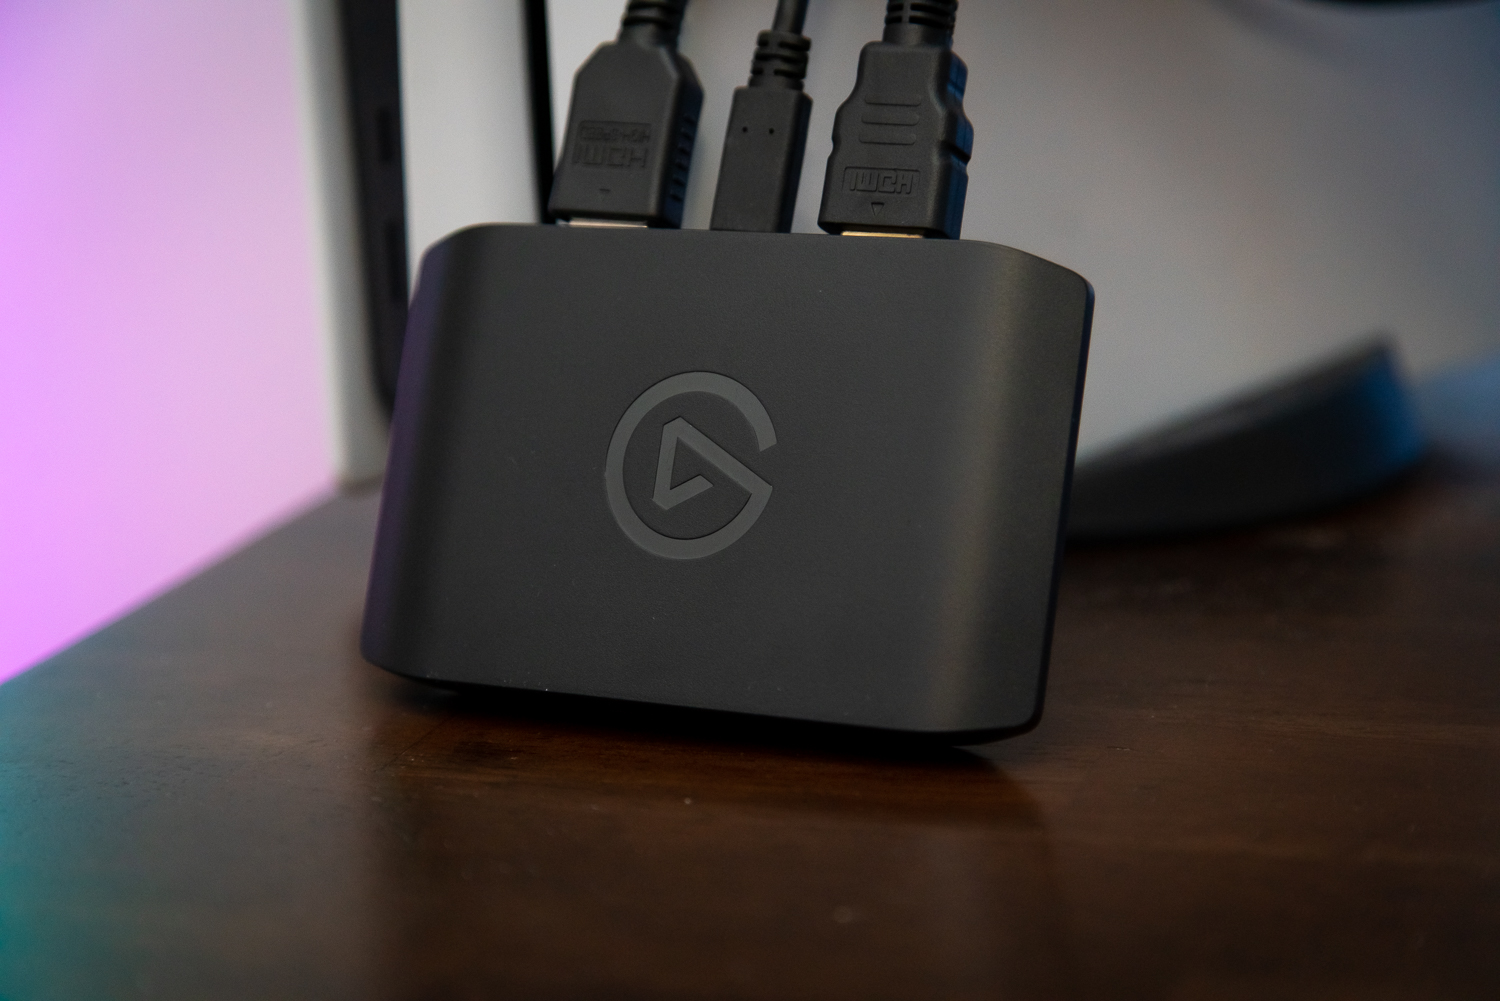 The Elgato HD60 X capture card leaning against a PS5.